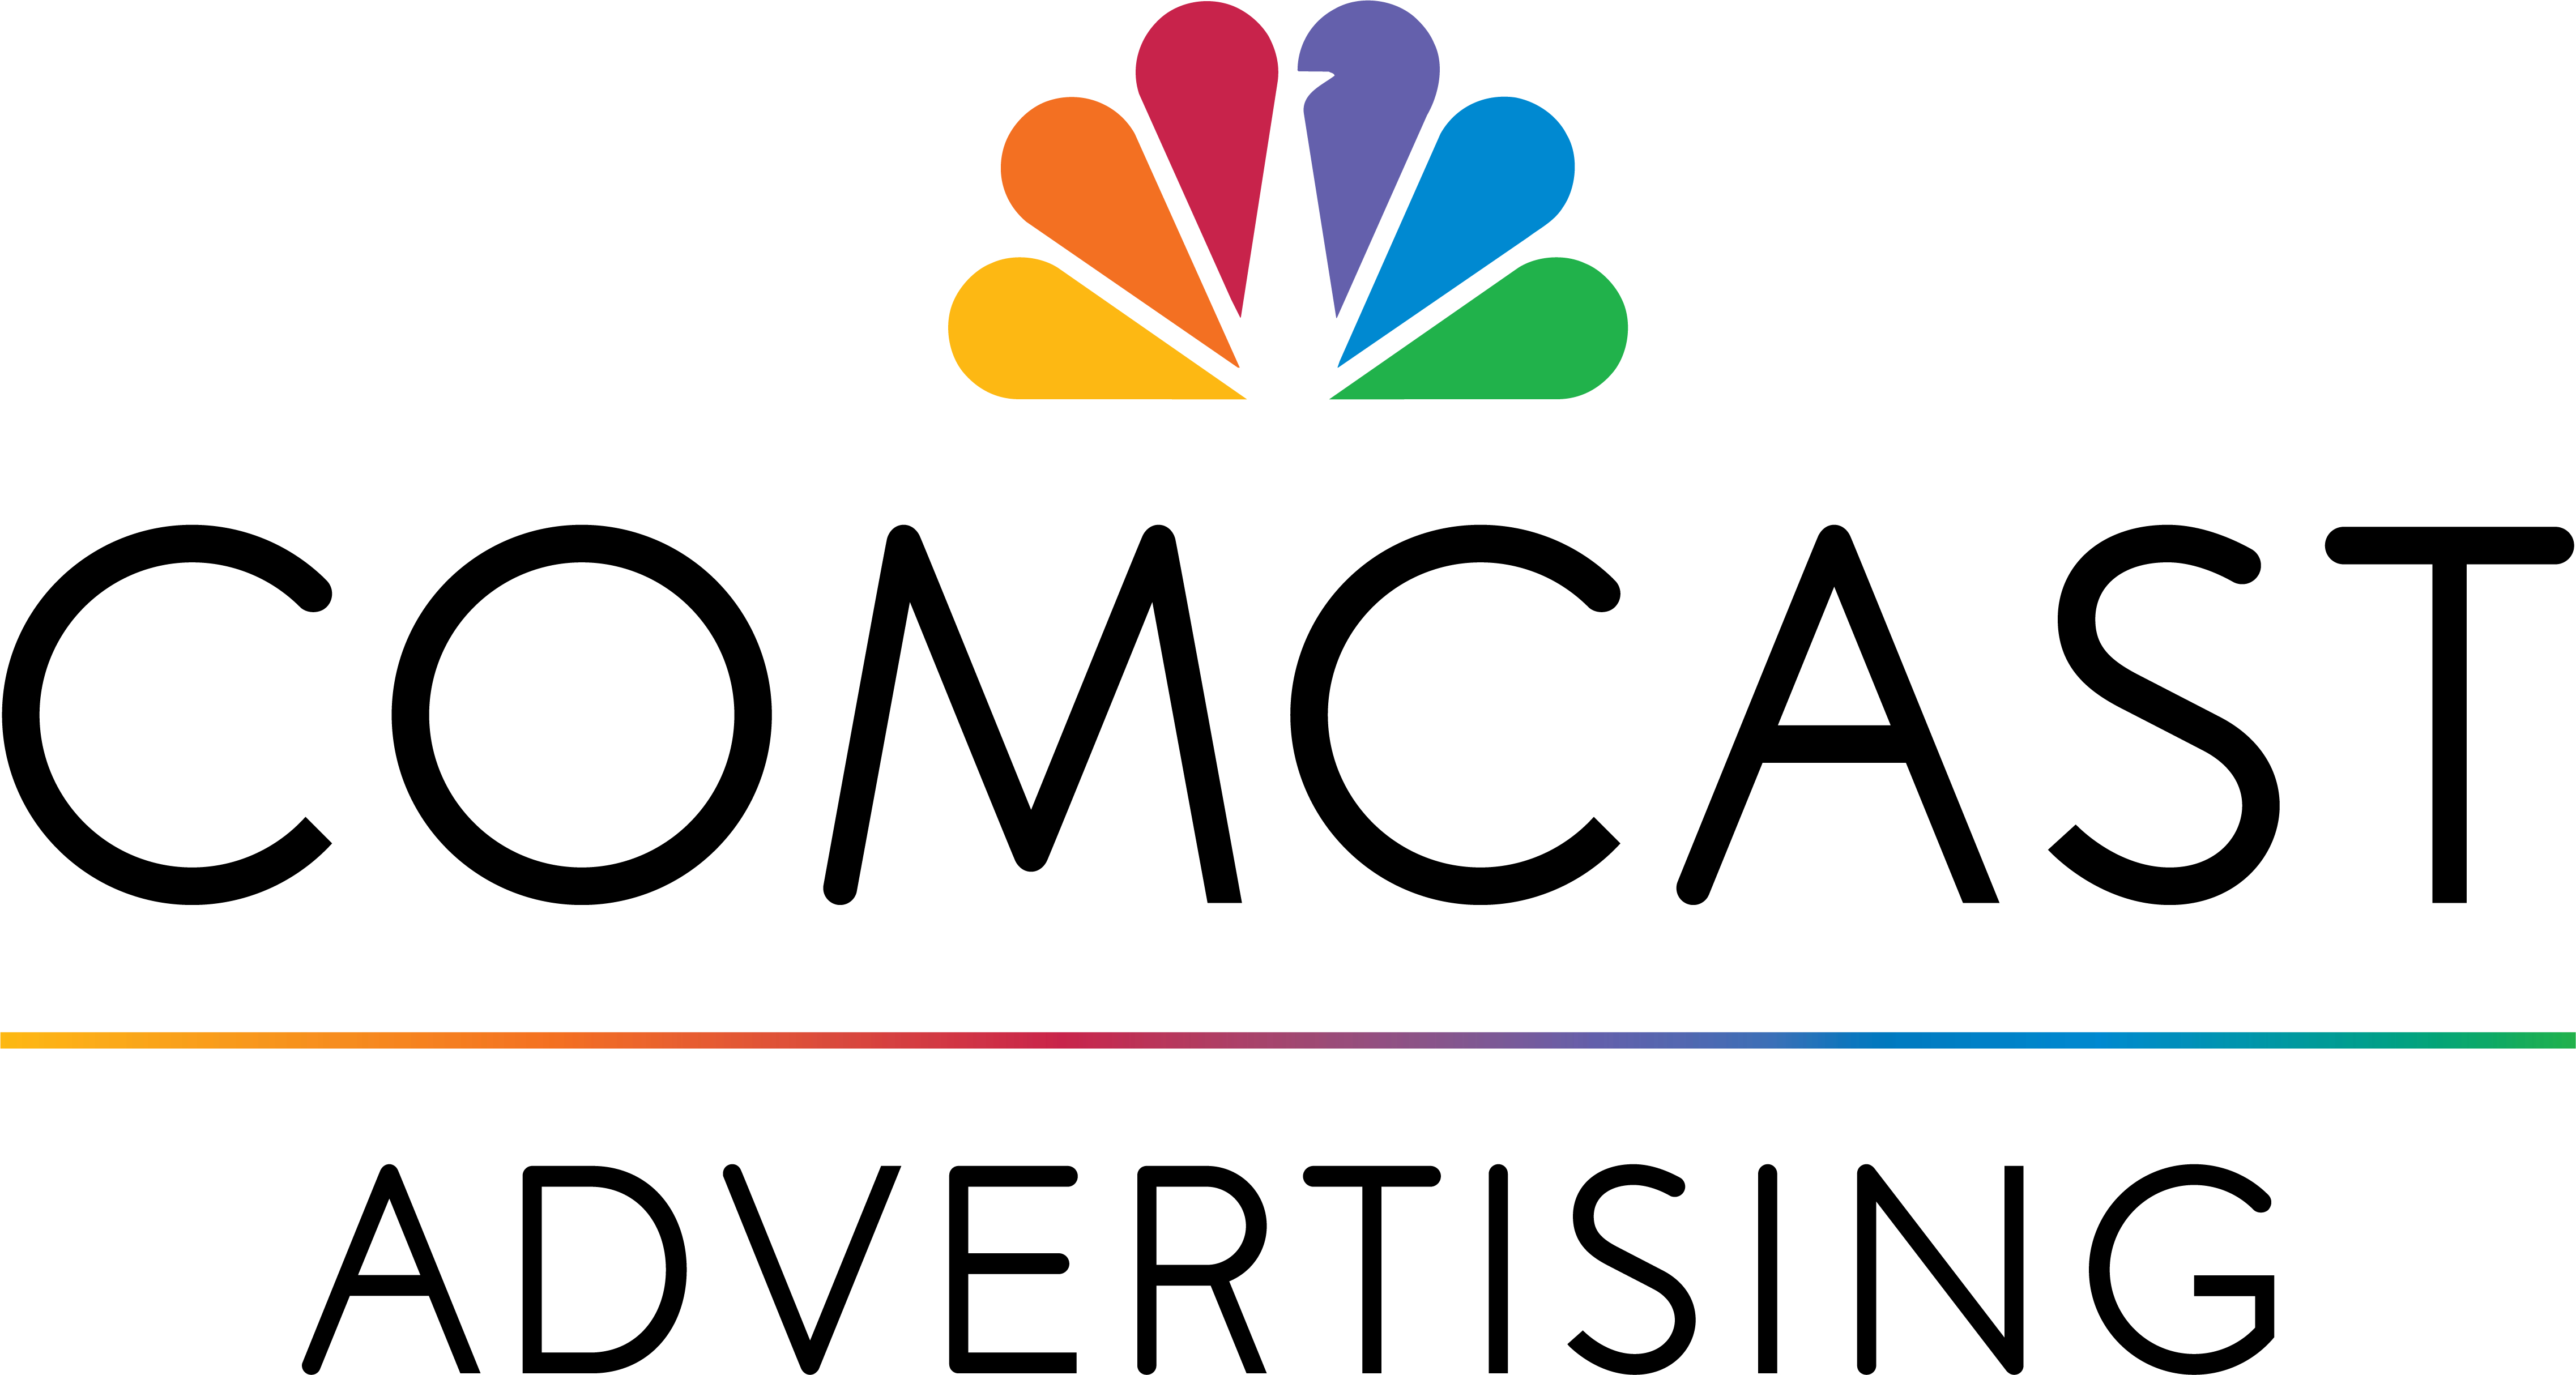 Cable Giant Comcast Enters Live-TV Streaming Arena 